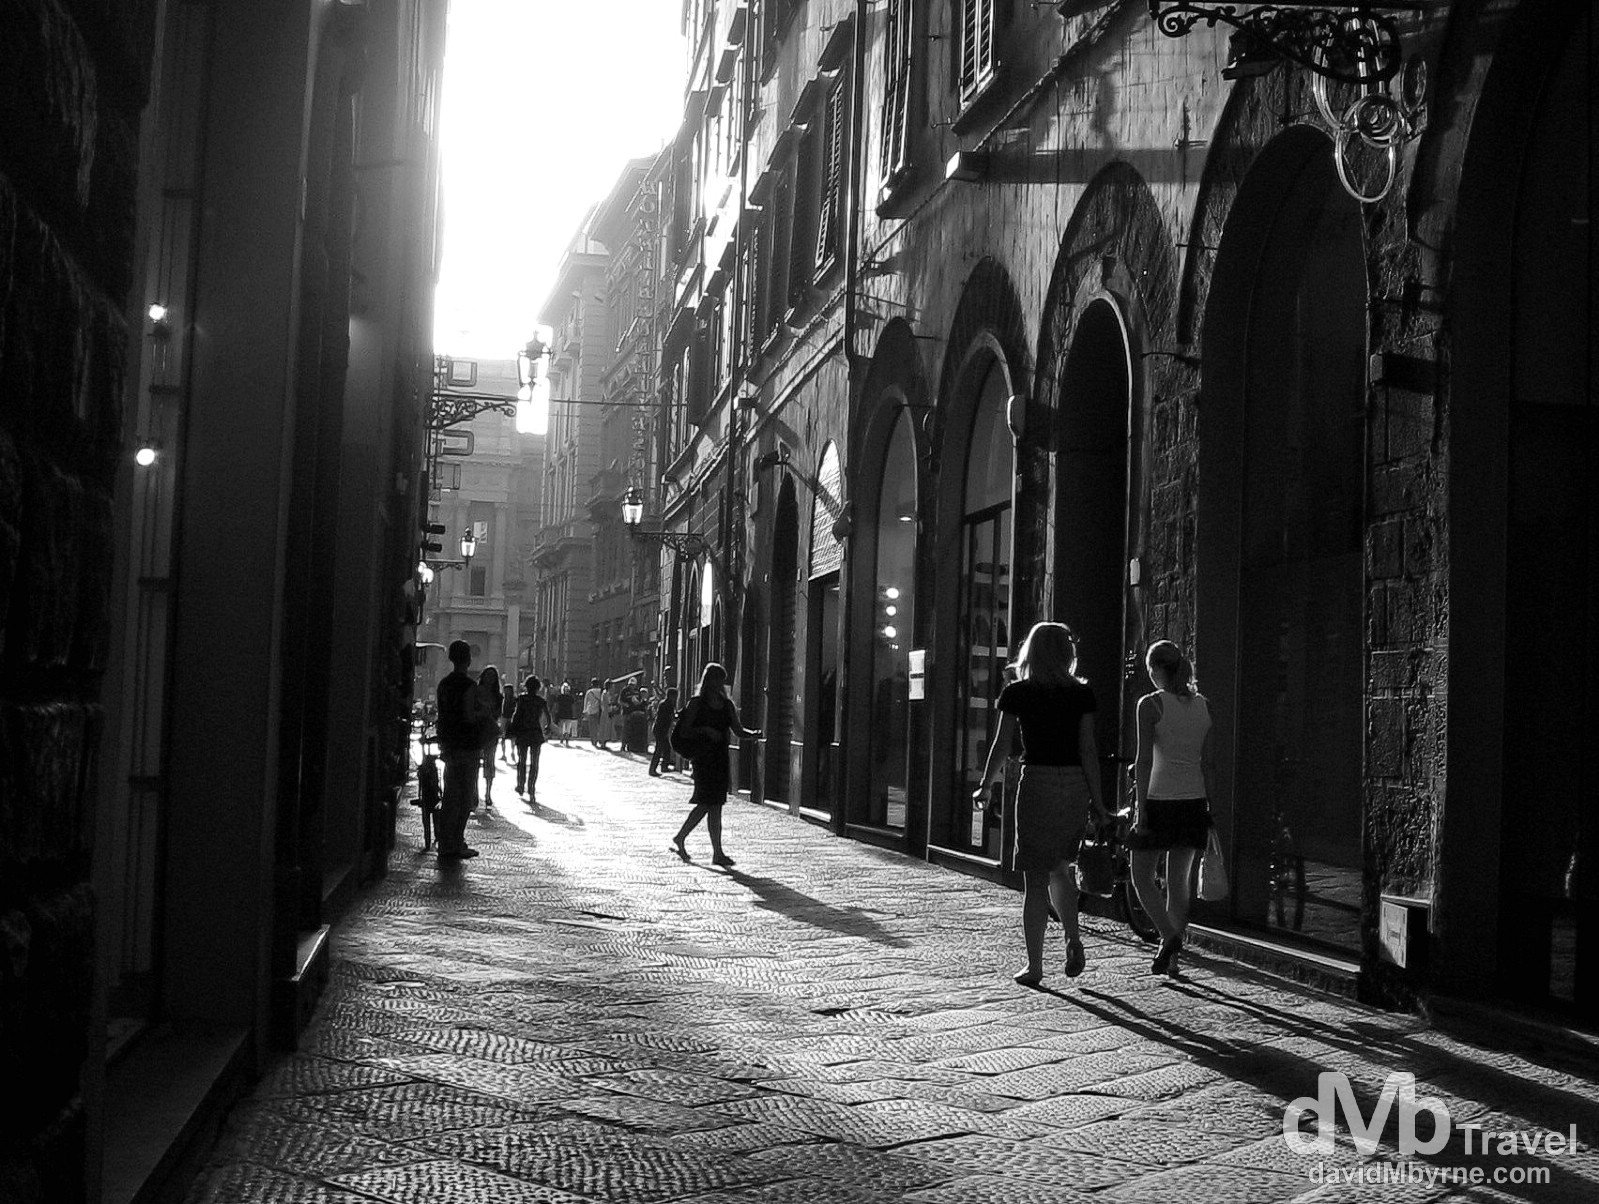 Late evening sunlight in a narrow lane off Piazza della Repubilica, Florence, Italy. August 28th 2007.